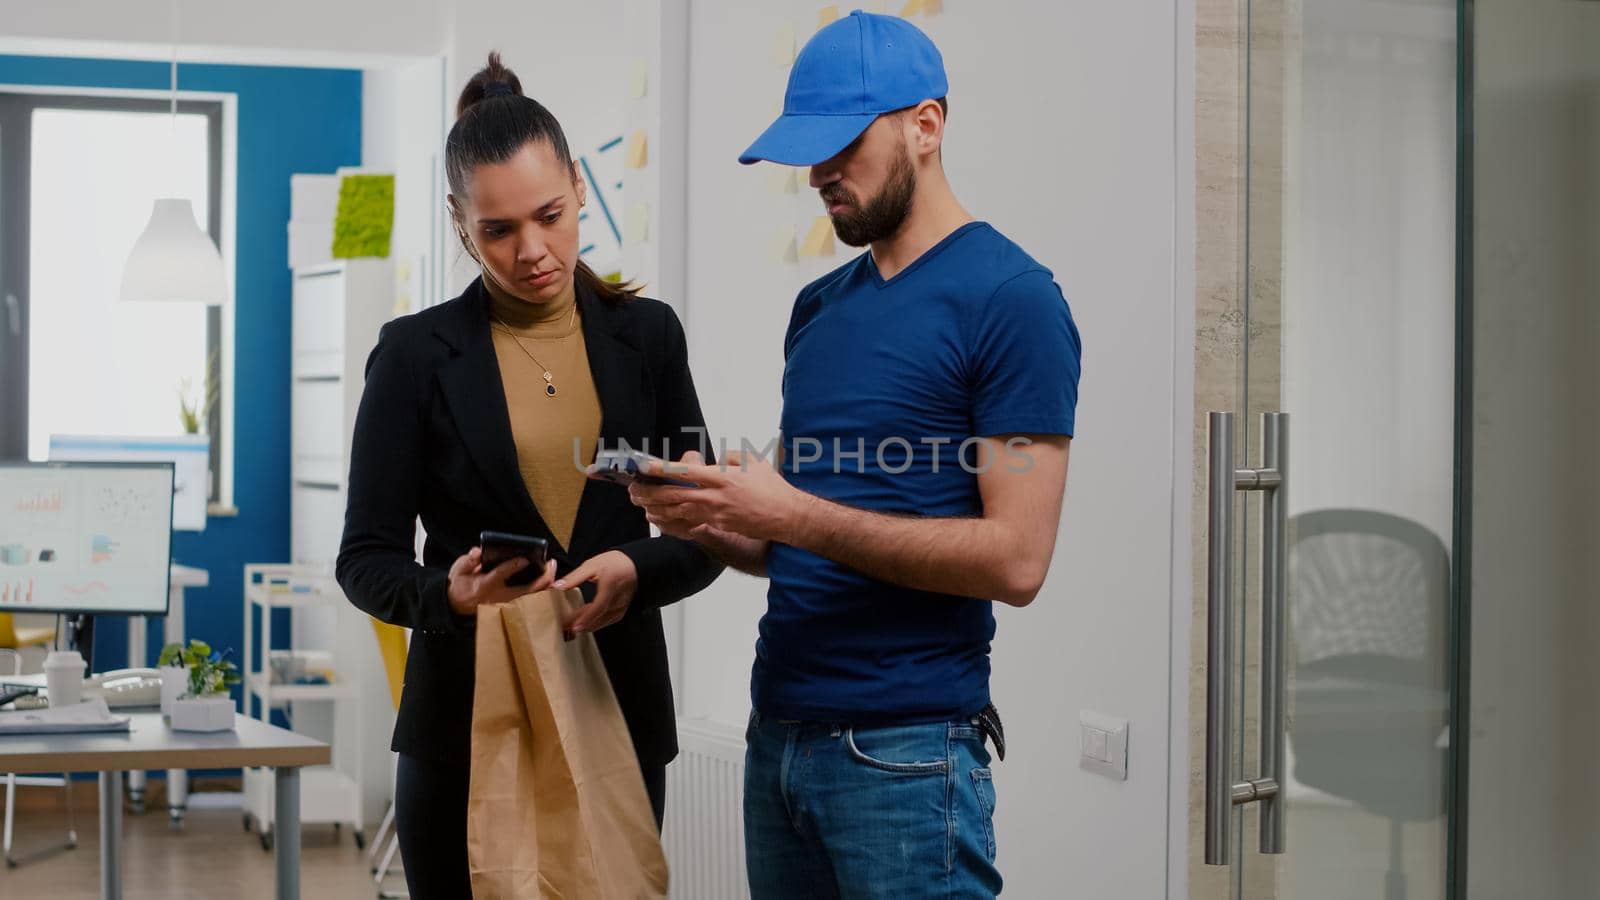 Delivery man bringing takeaway food meal order to businesswoman in startup company office by DCStudio